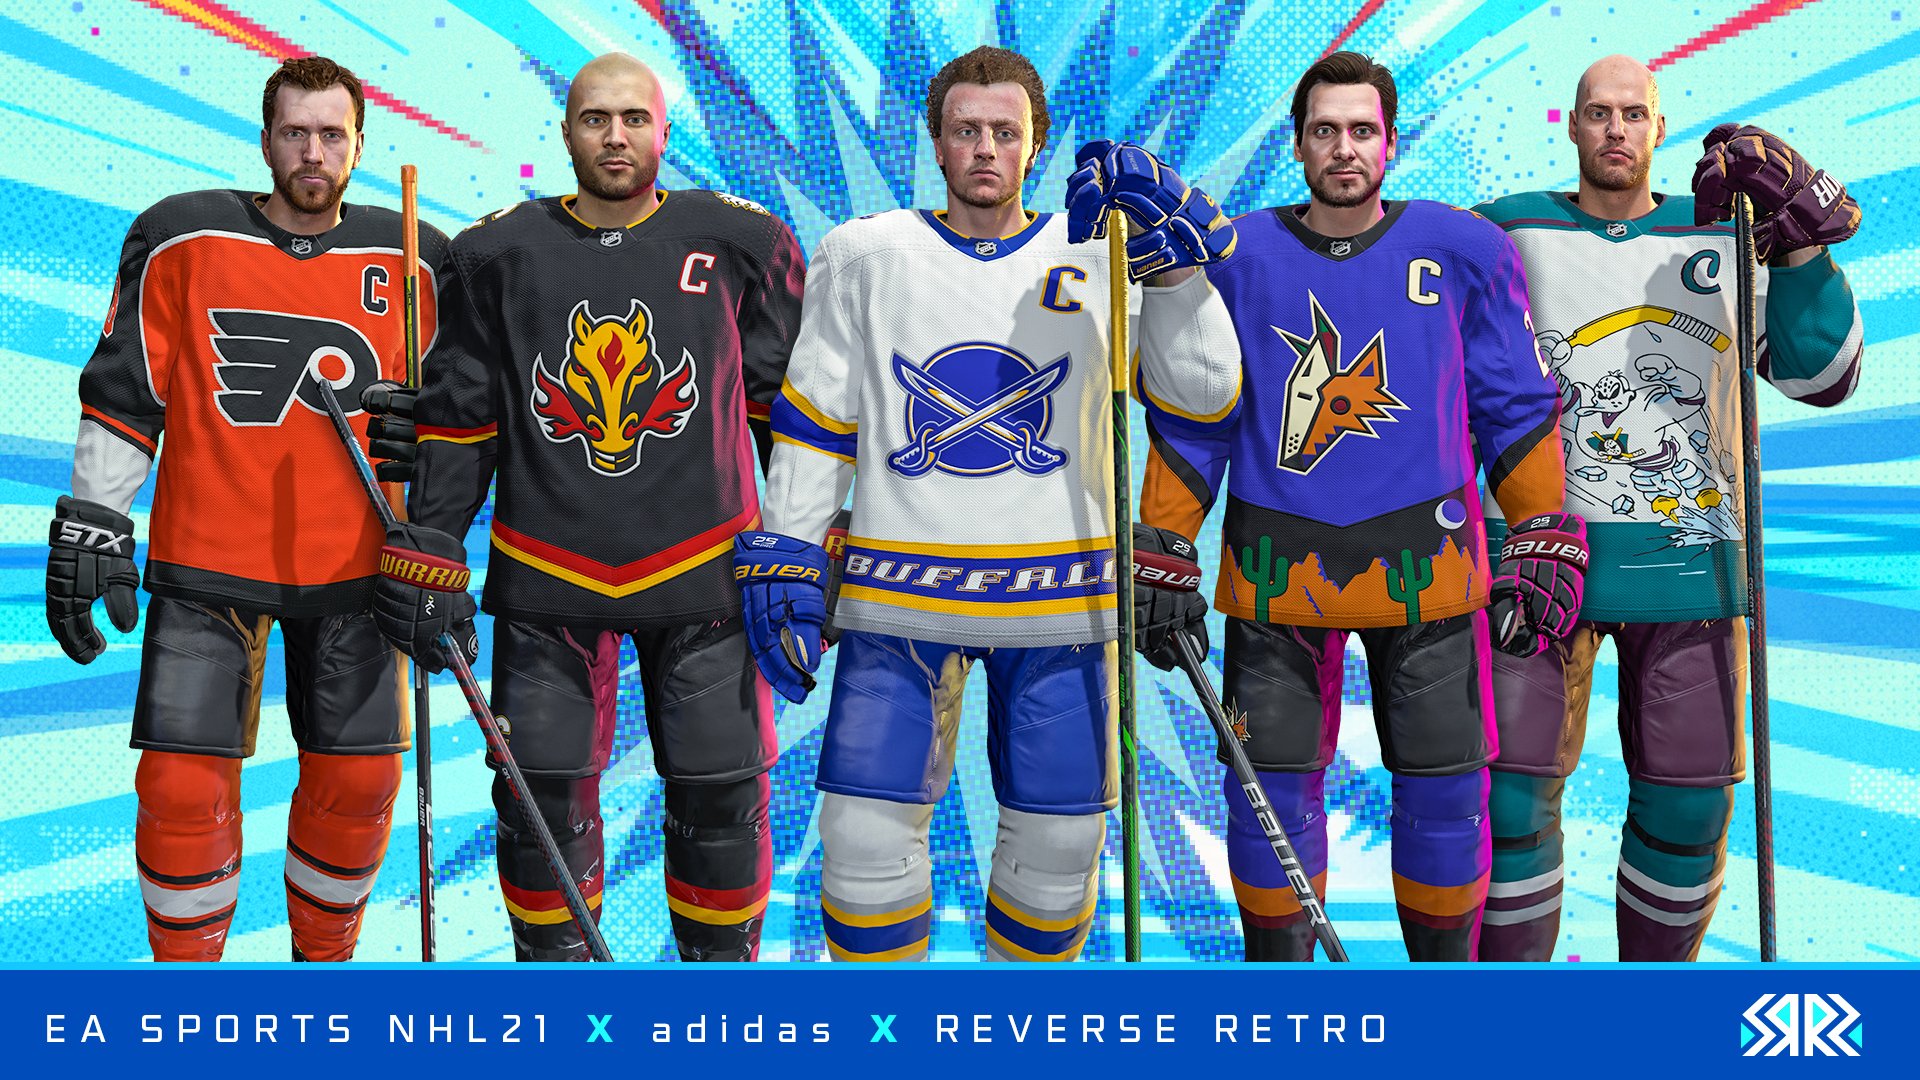 Coolest custom jersey you've ever created? : r/EA_NHL